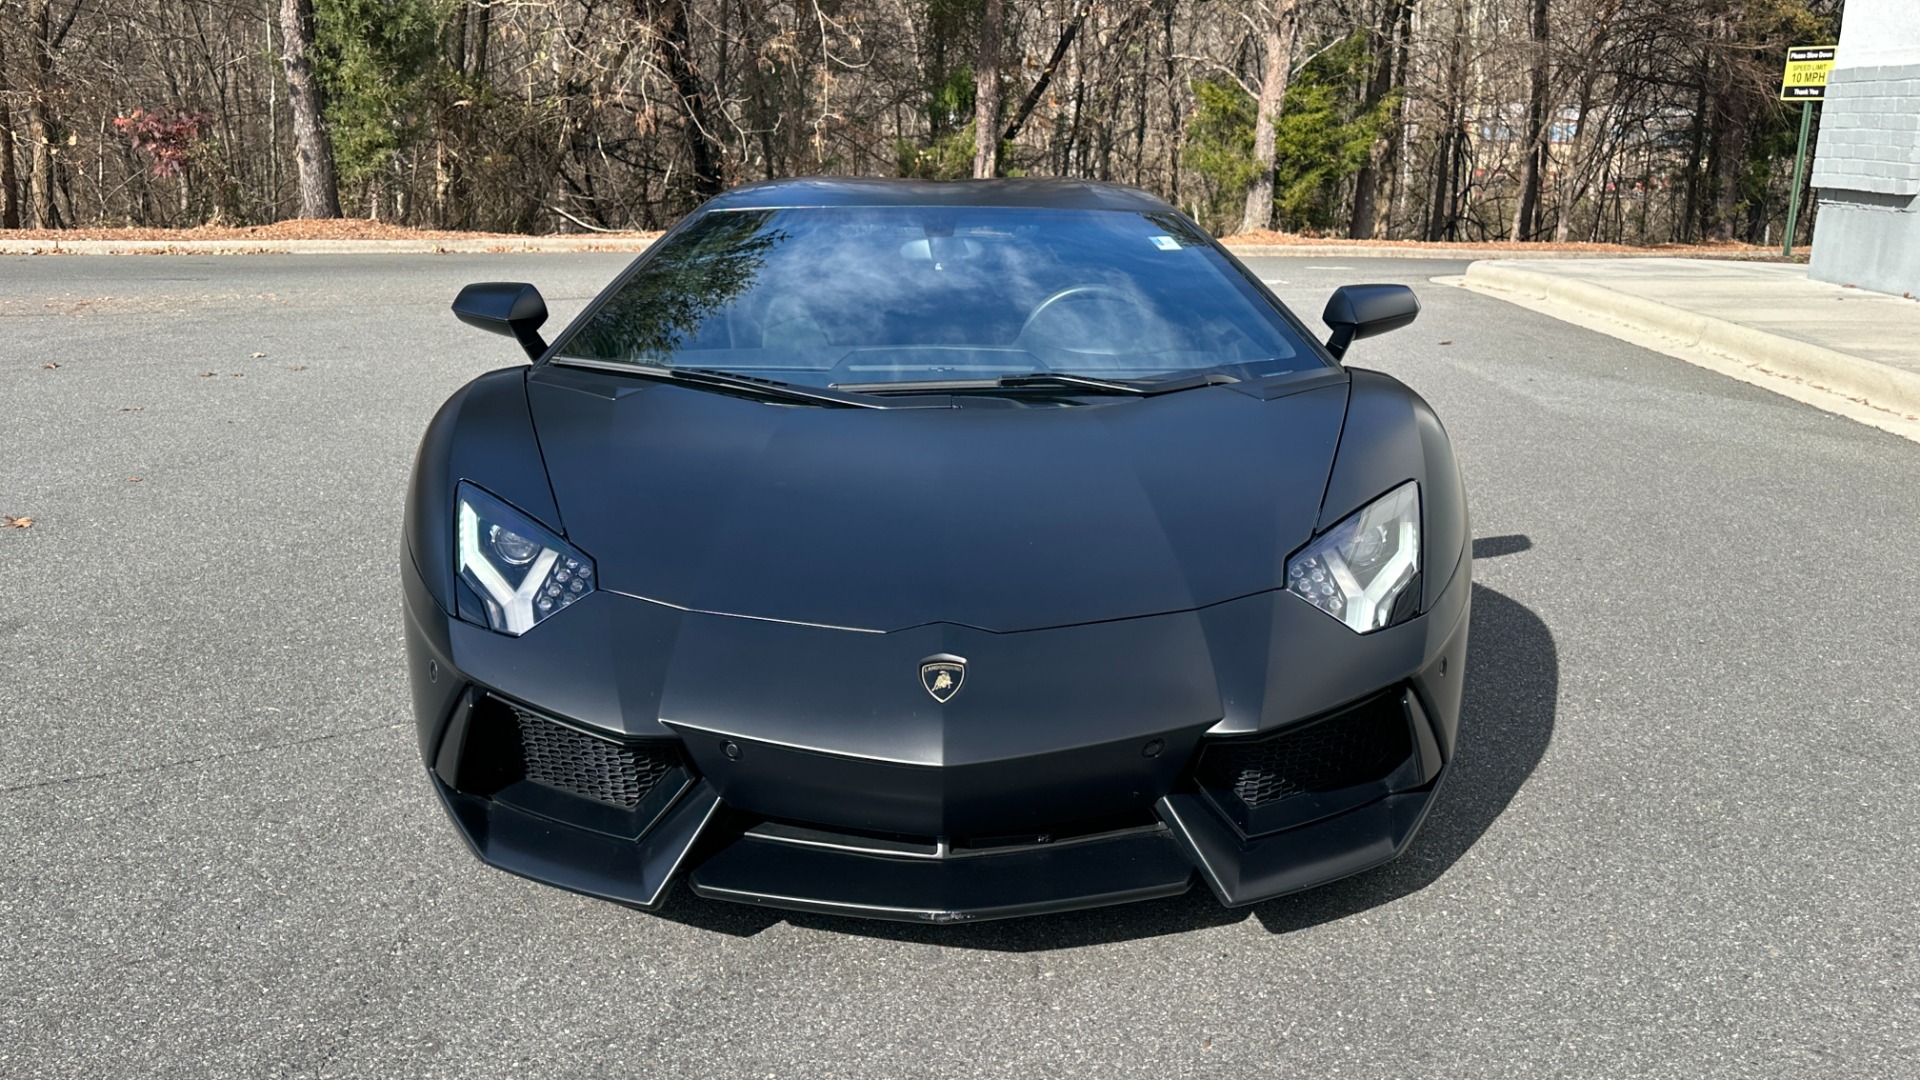 Used 2013 Lamborghini Aventador LP 700-4 / FULL PAINT PROTECTION / MATTE PAINT / FORGED WHEELS / GLASS ENGI for sale $311,000 at Formula Imports in Charlotte NC 28227 9